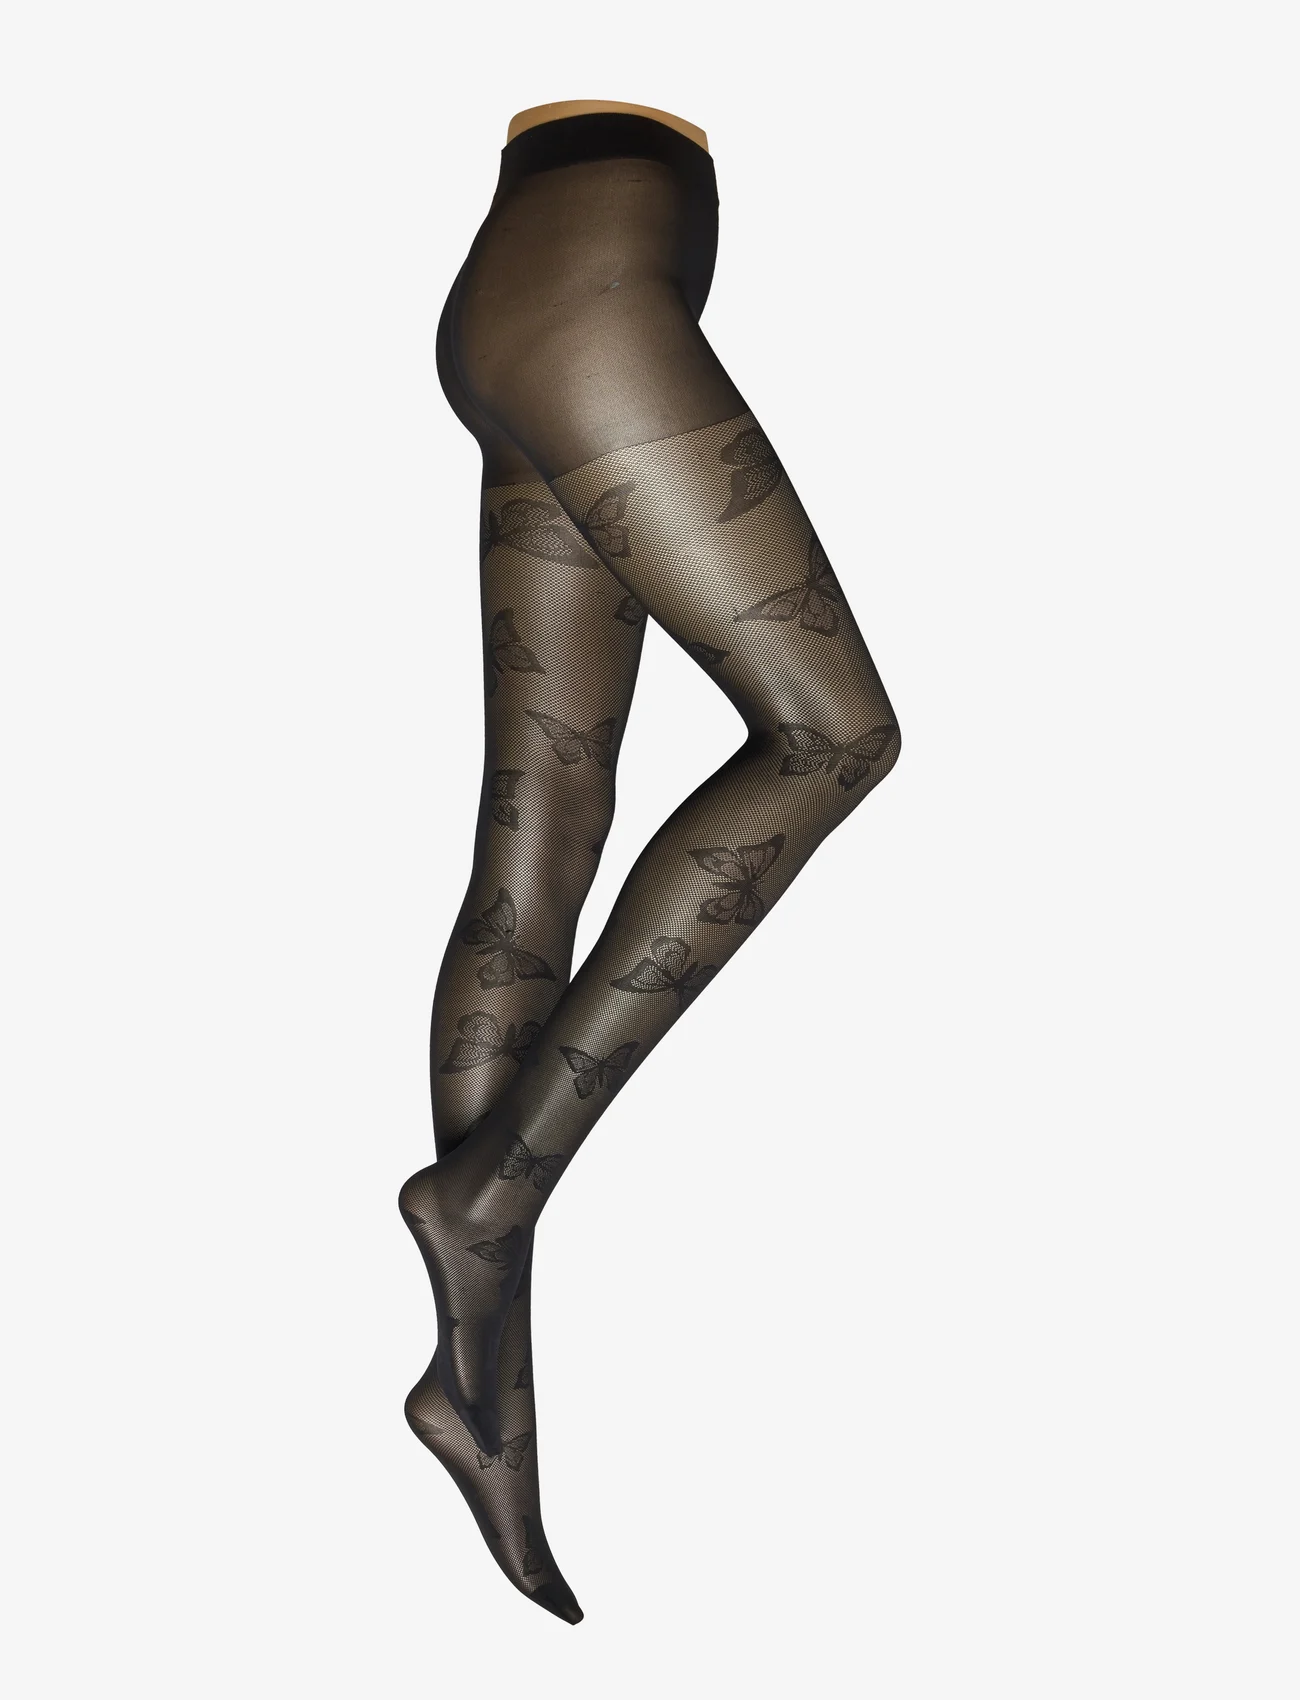 Lindex - Tights 40 den butterfly - lowest prices - black - 0